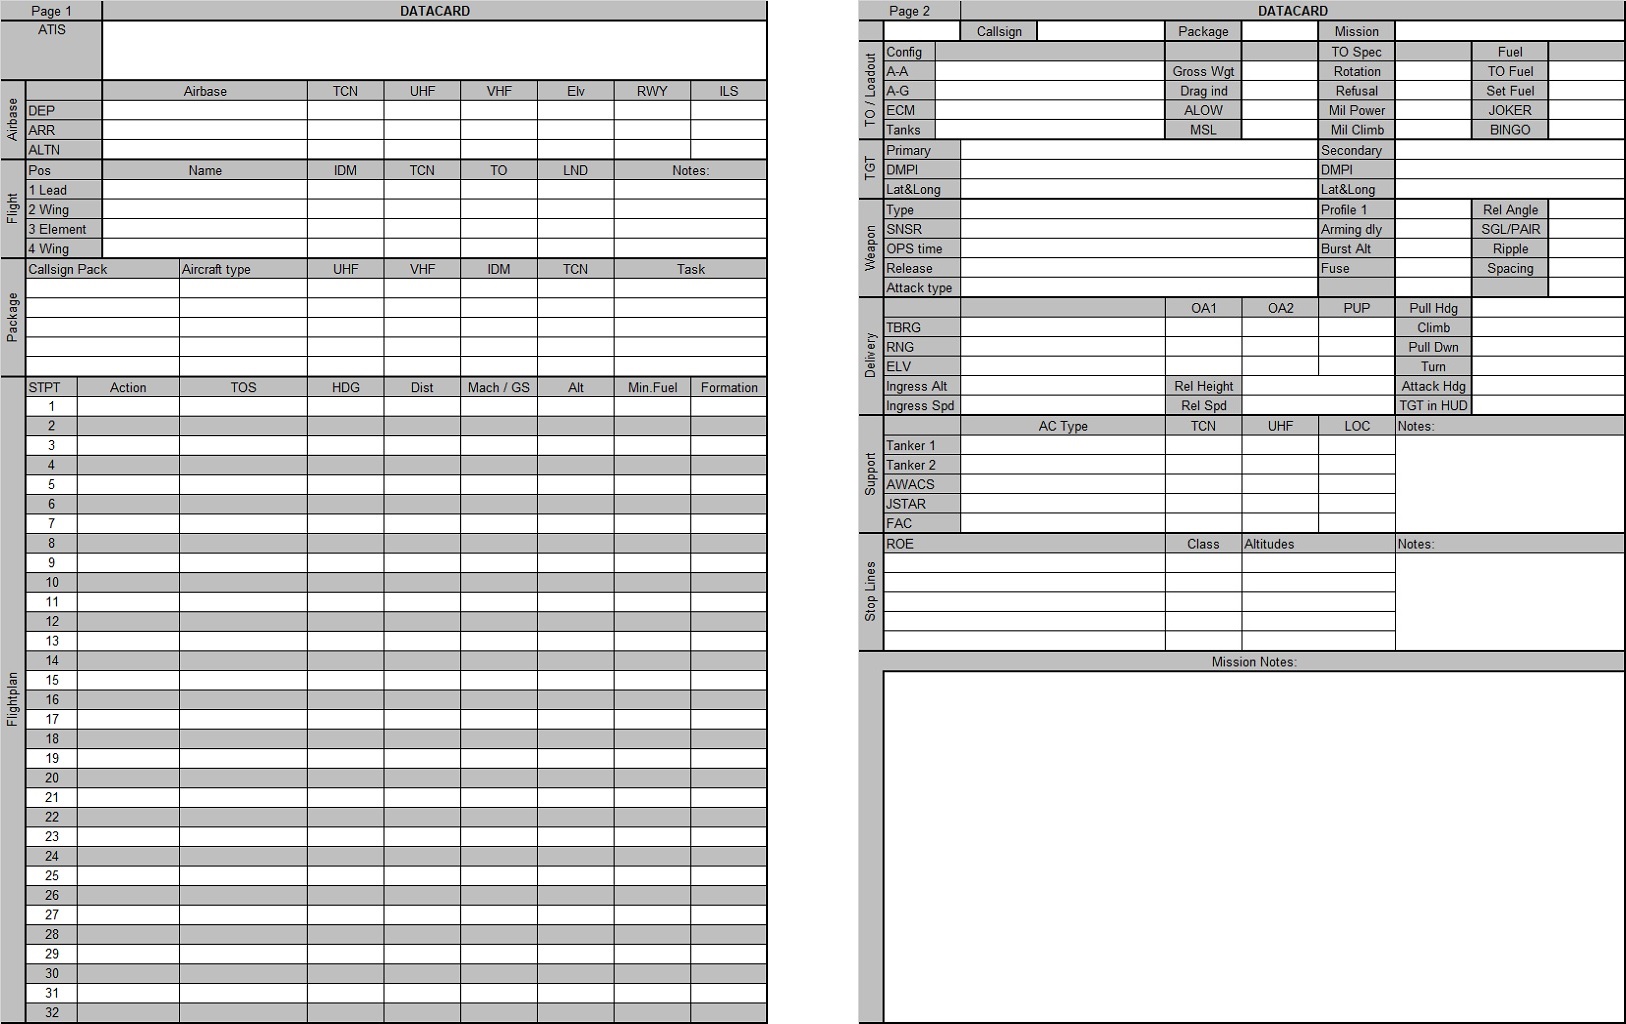 Mission Kneeboard Template (Data Card) in Excel format